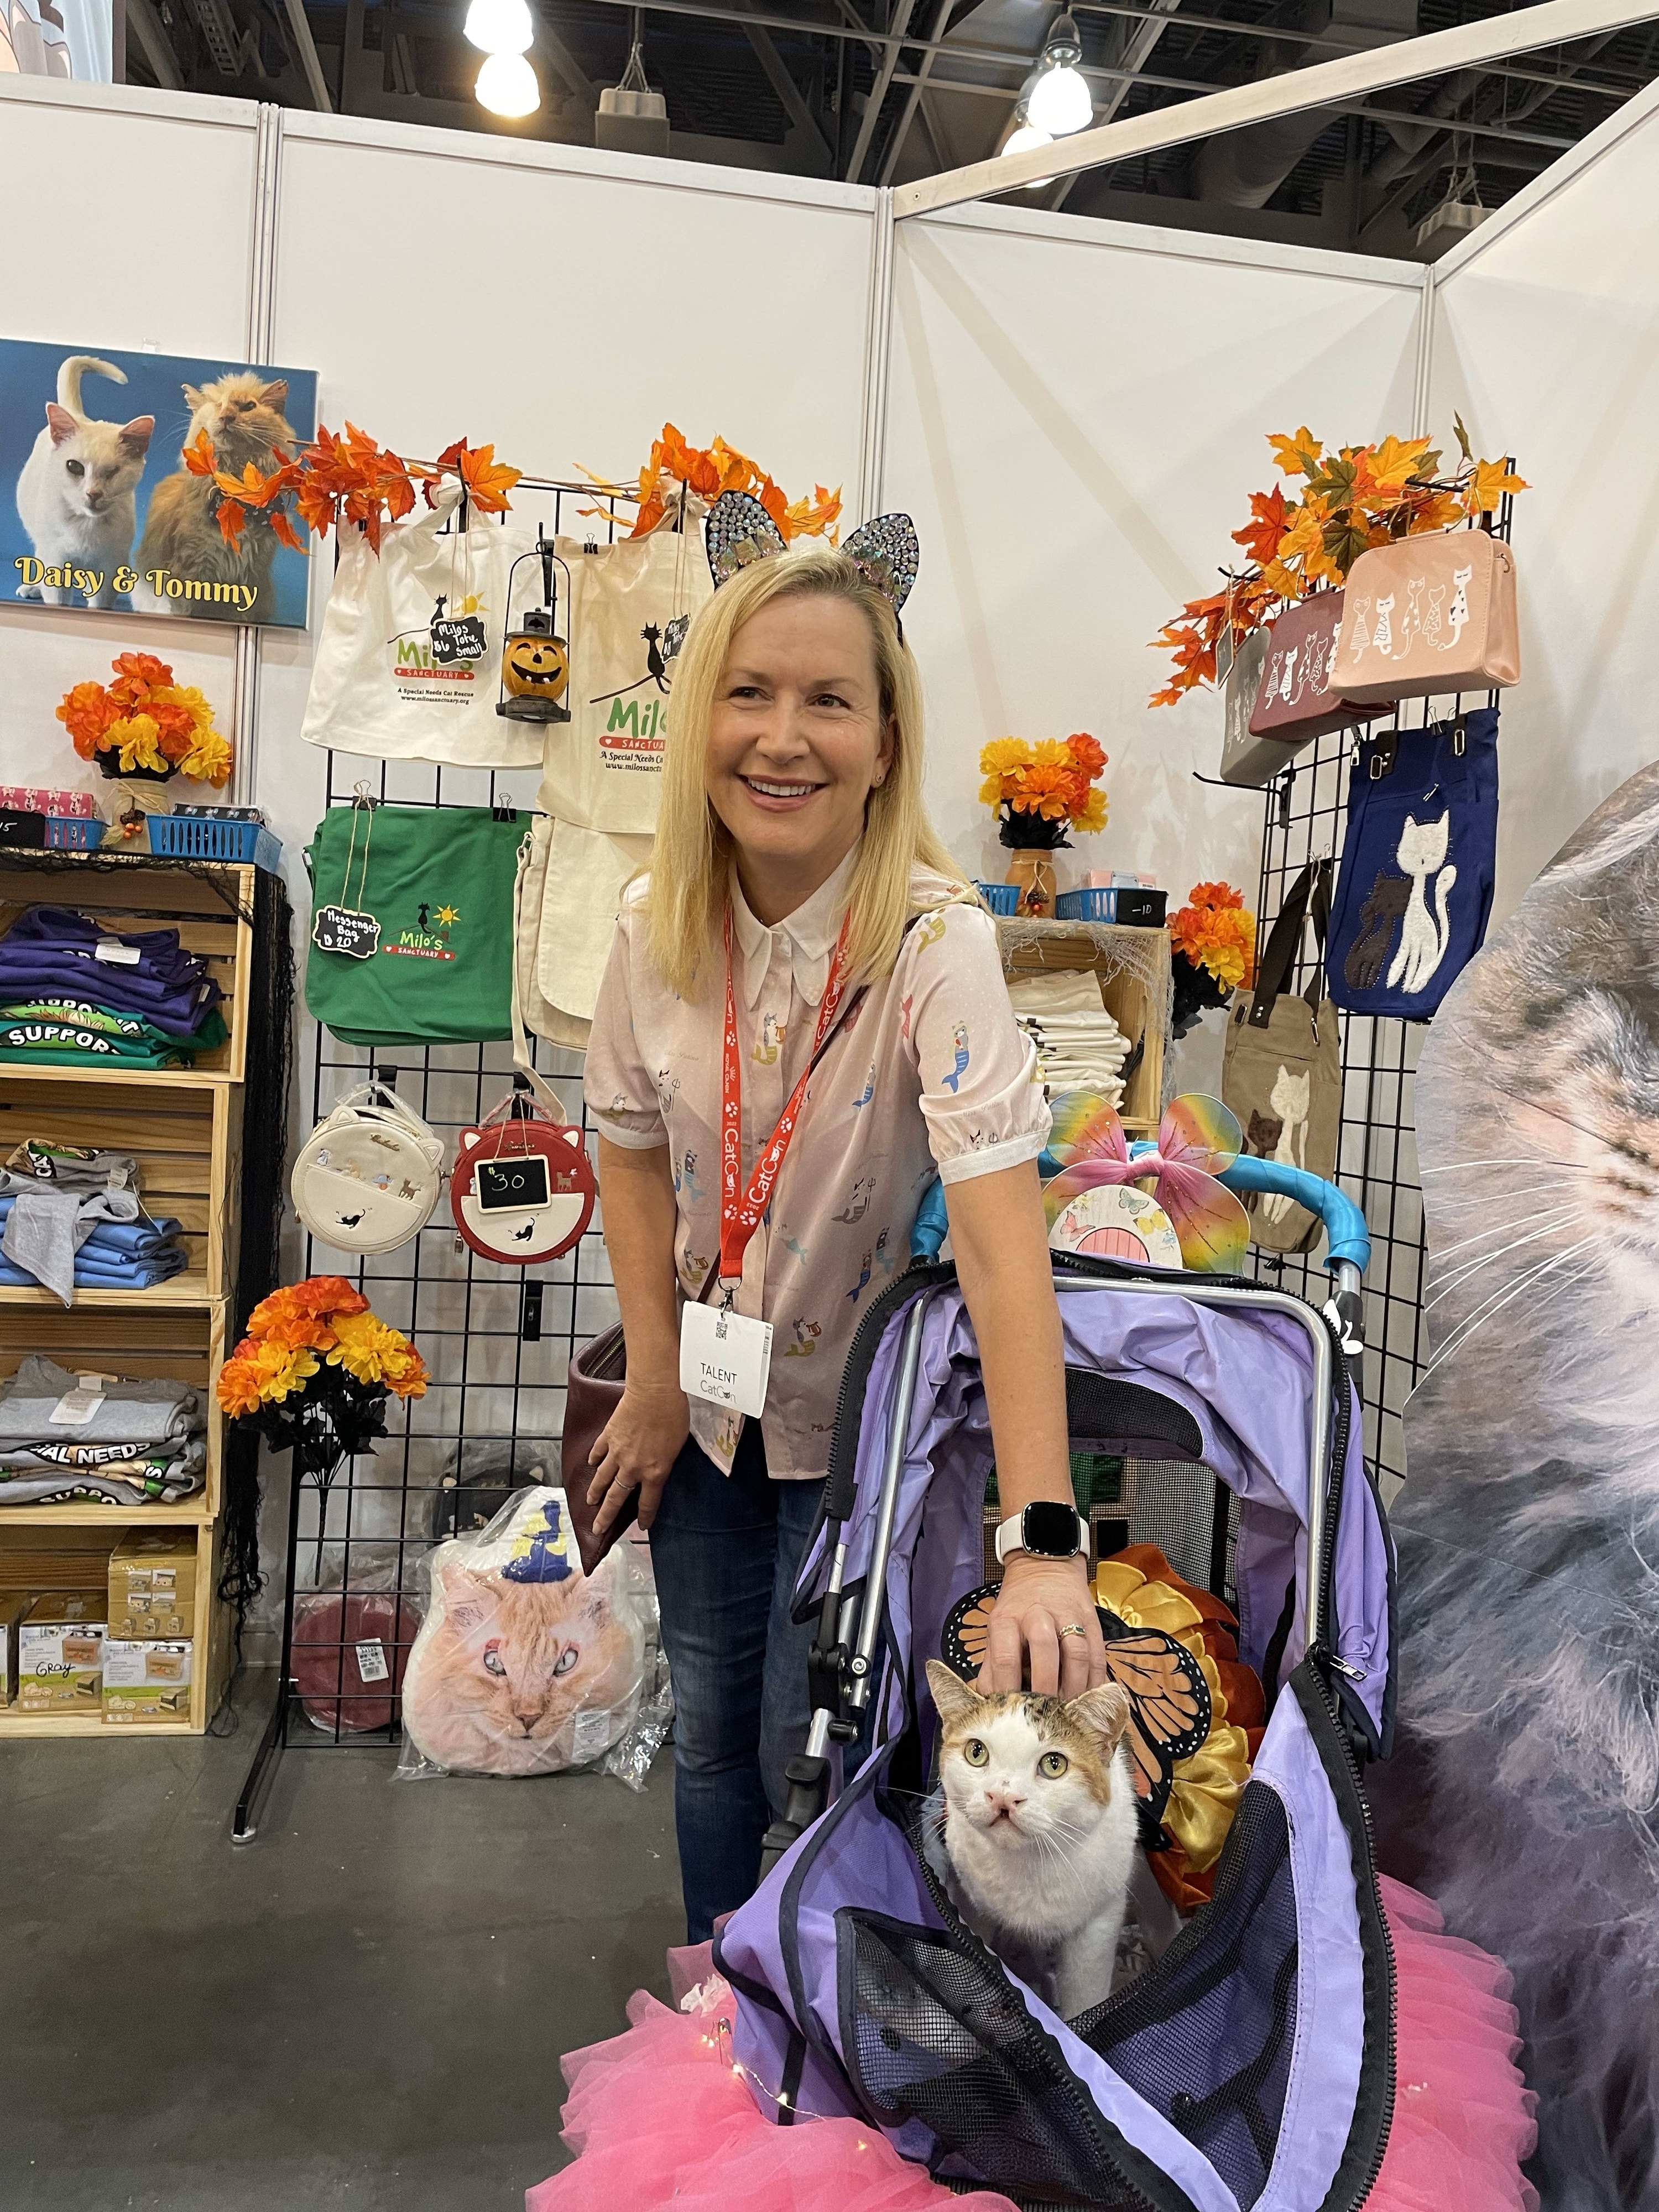 Angela Kinsey pets Snickers who sits in a stroller in front of cat merch